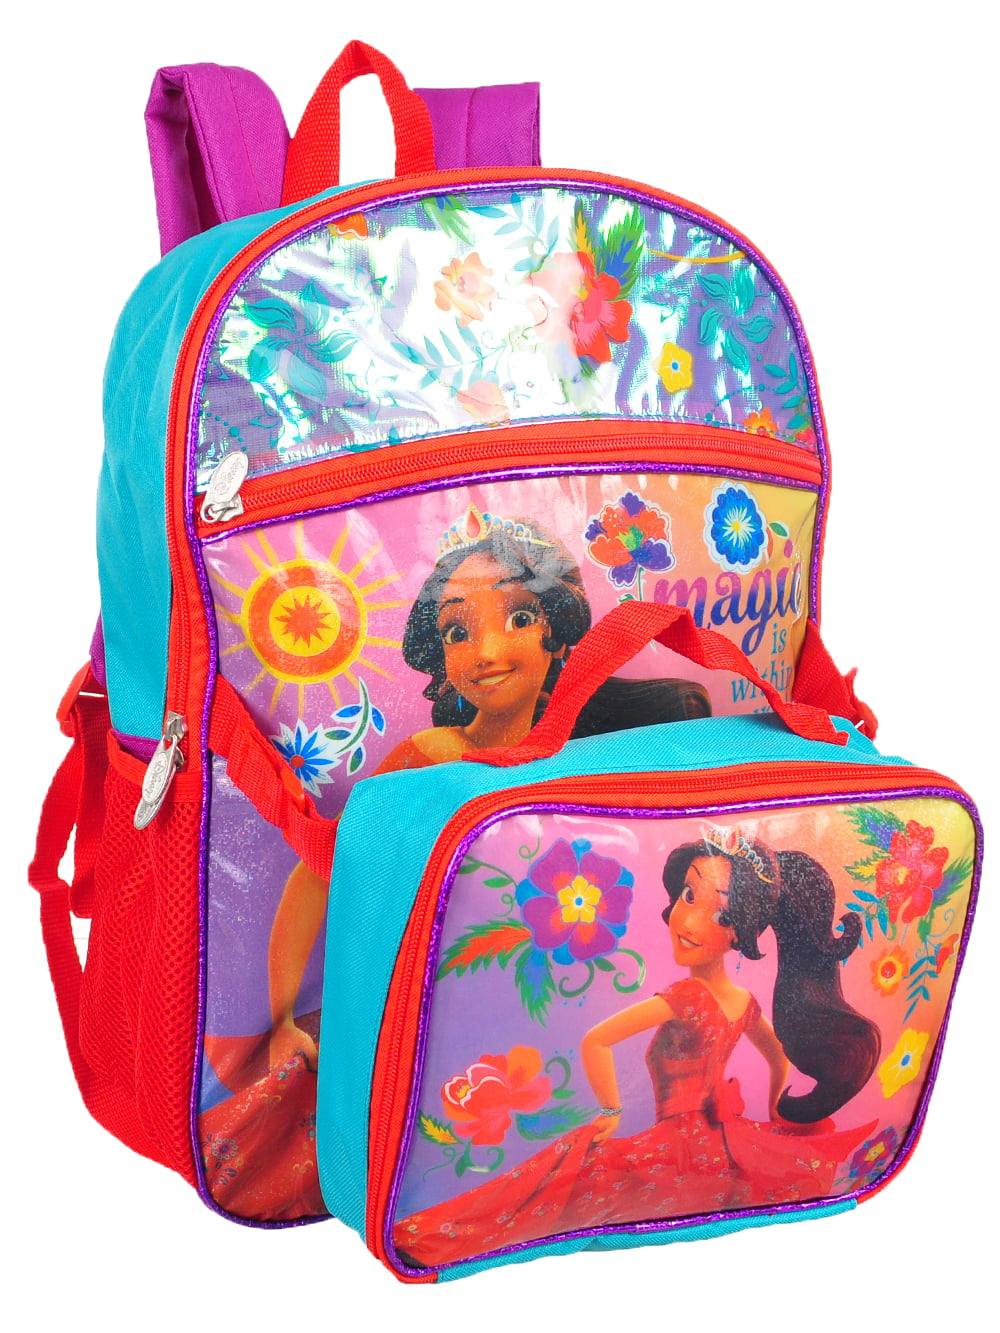 Details about   NWT Disney Store Elena of Avalor Elena Lunch Box Tote school NEW 